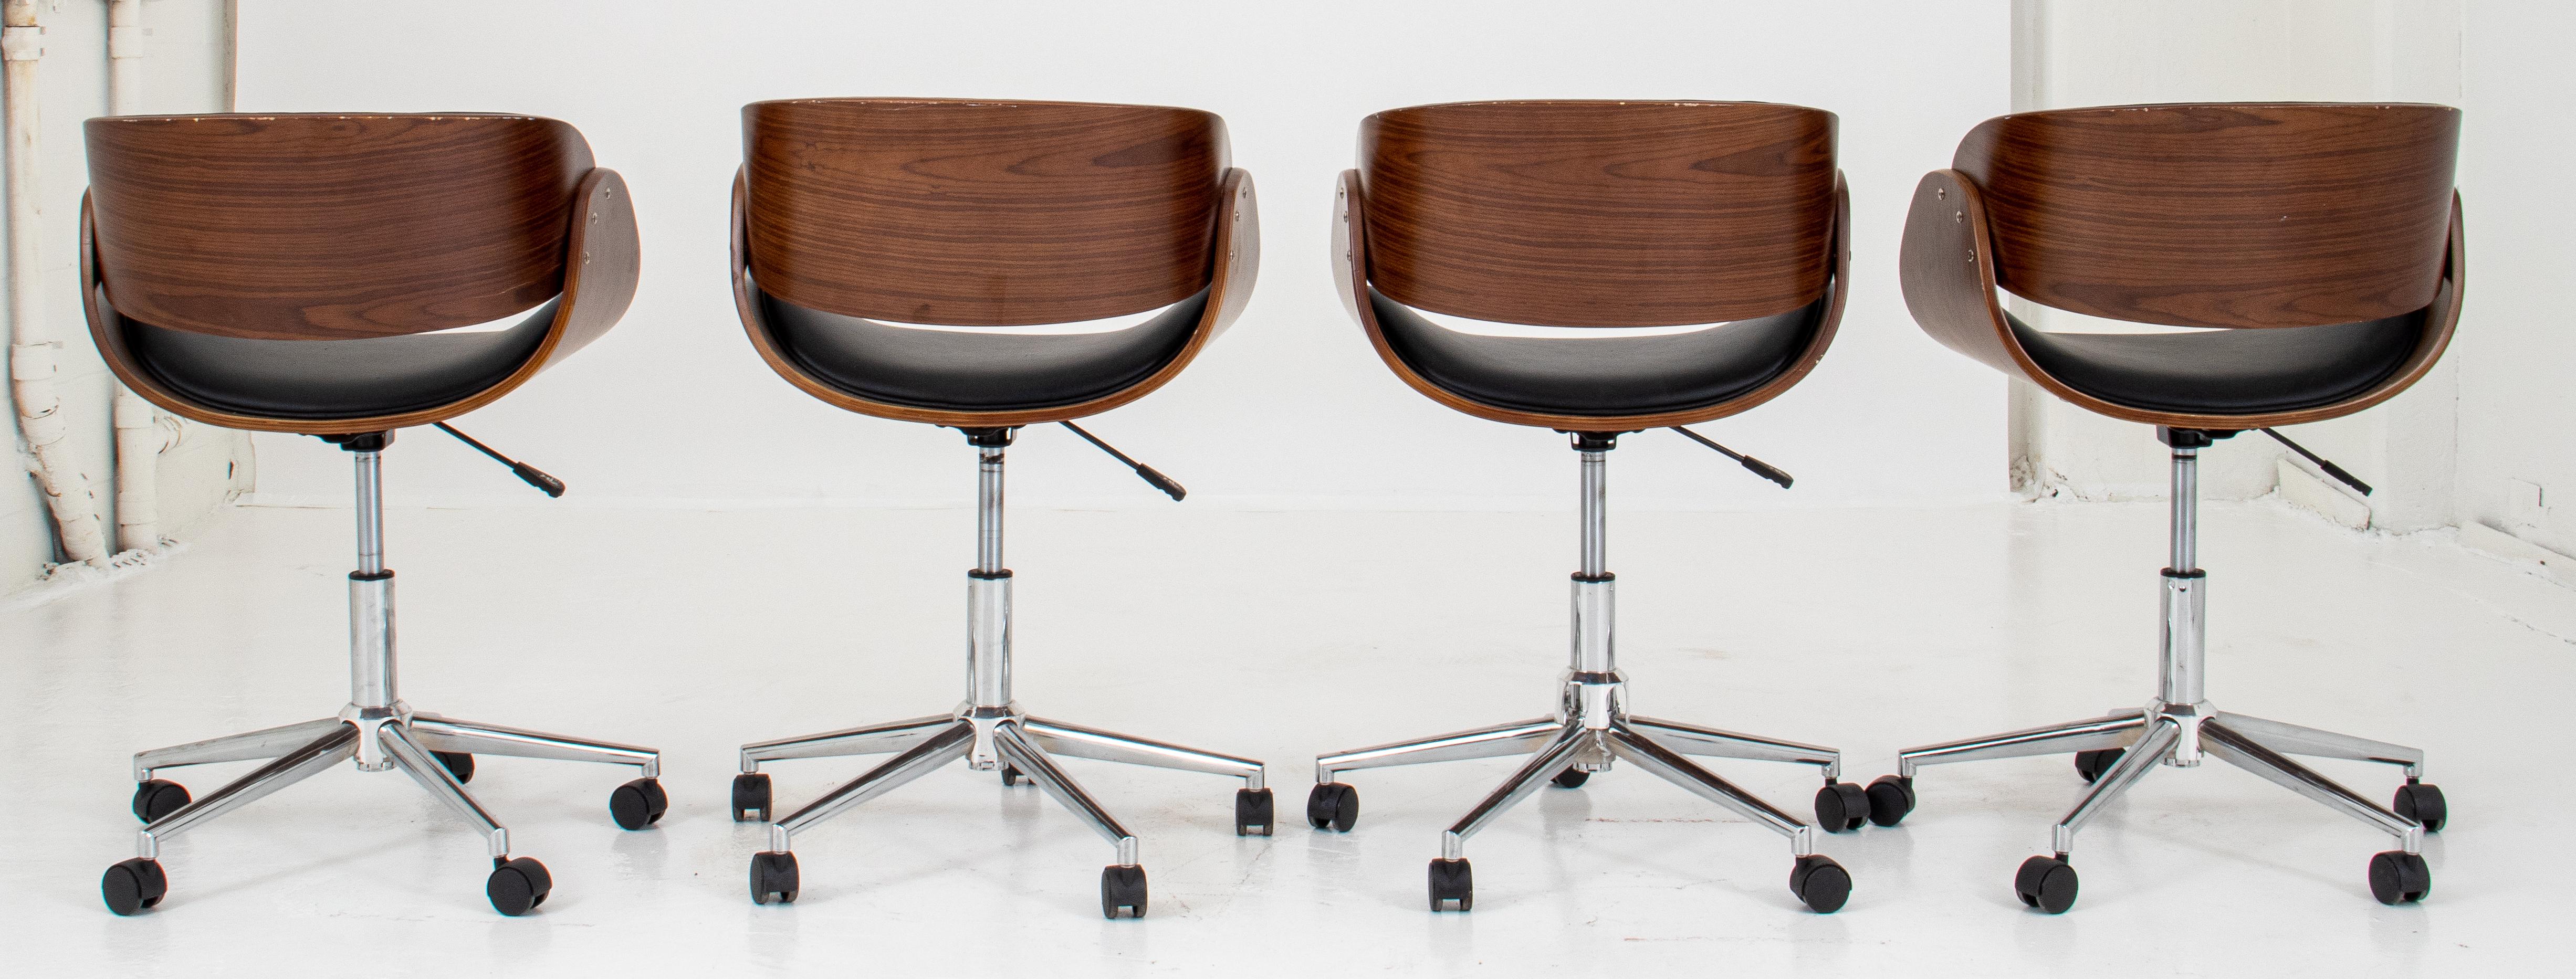 Mid-Century Modern Style Swivel Chairs, 4 For Sale 1